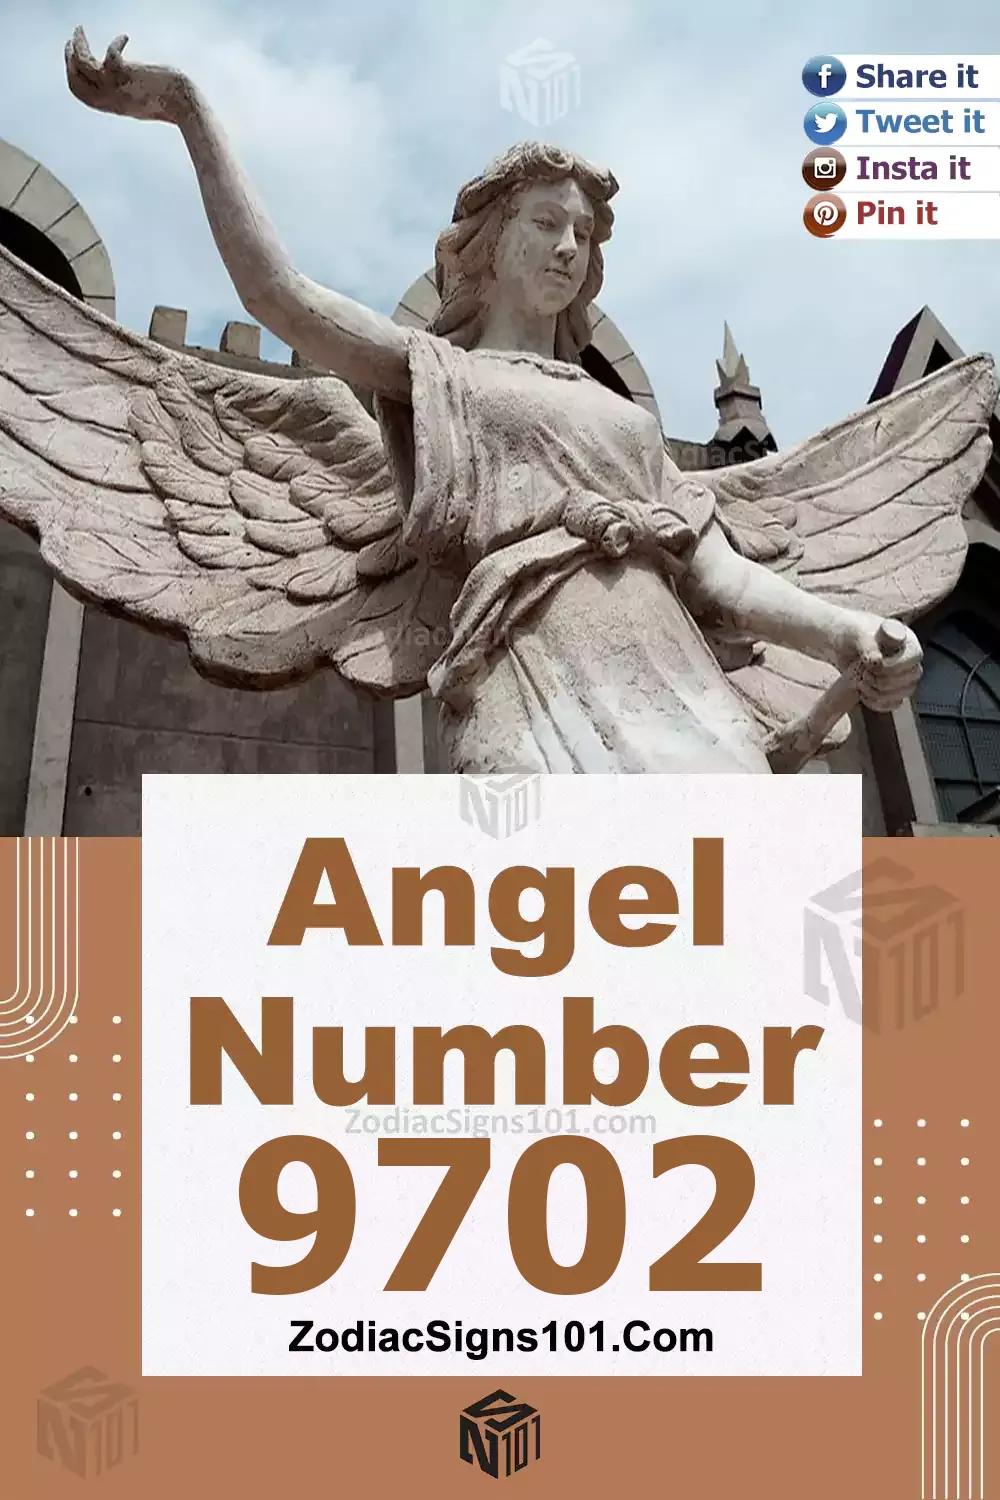 9702 Angel Number Meaning